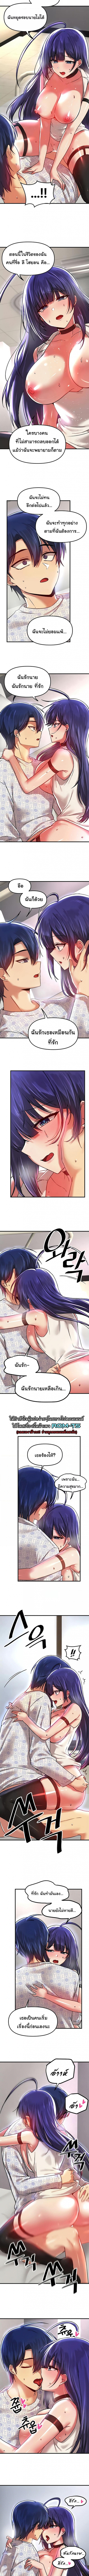 Trapped in the Academy’s Eroge 68 ภาพที่ 4